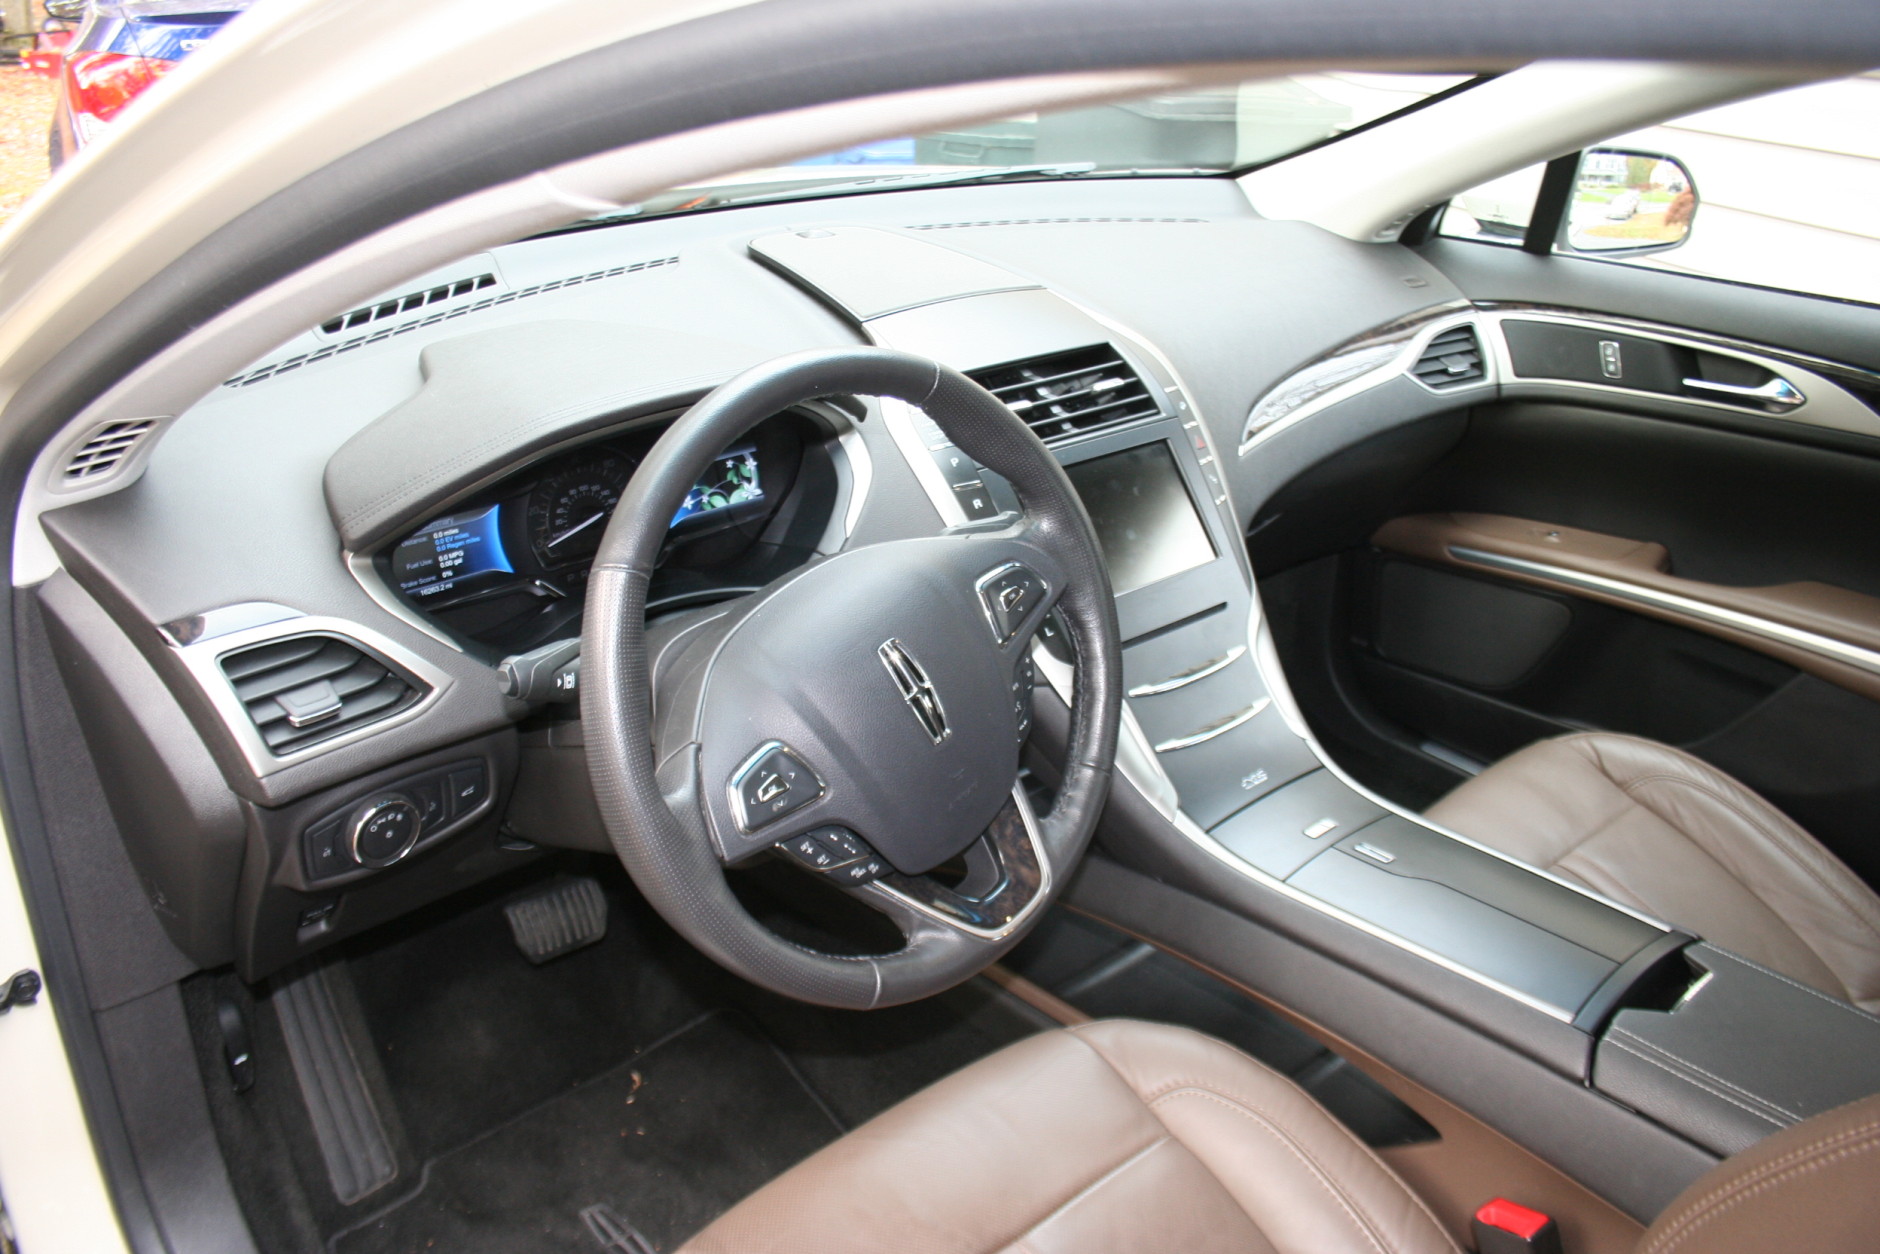 The trim and dash are made of nicer materials than before, but not as nice as some of the competition. (WTOP/Mike Parris)